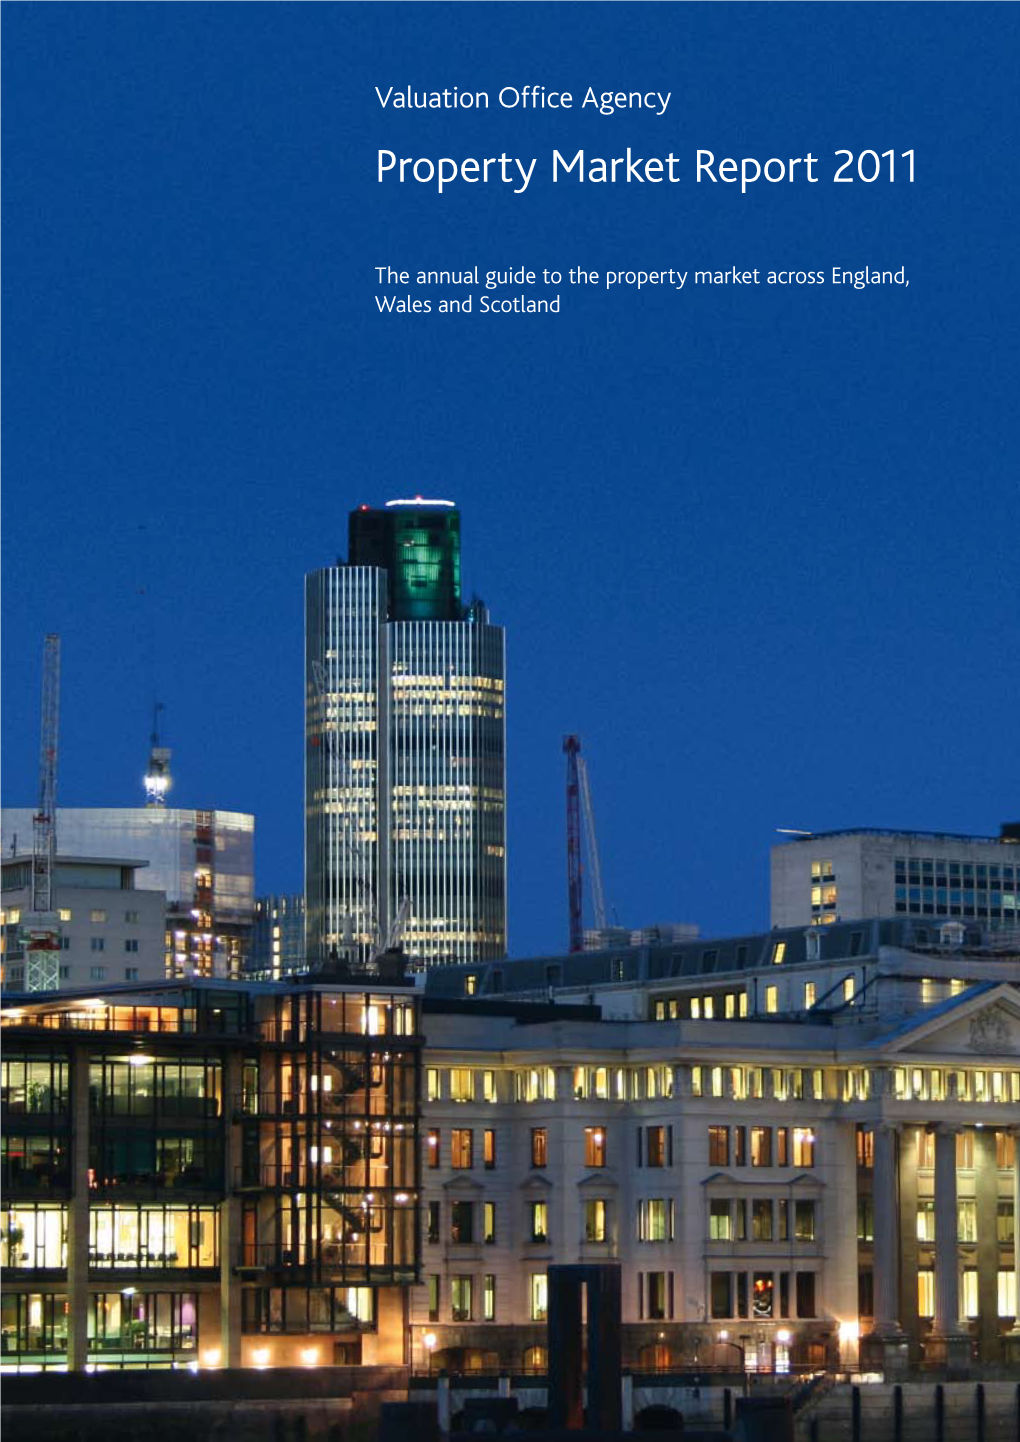 Valuation Office Agency Property Market Report 2011